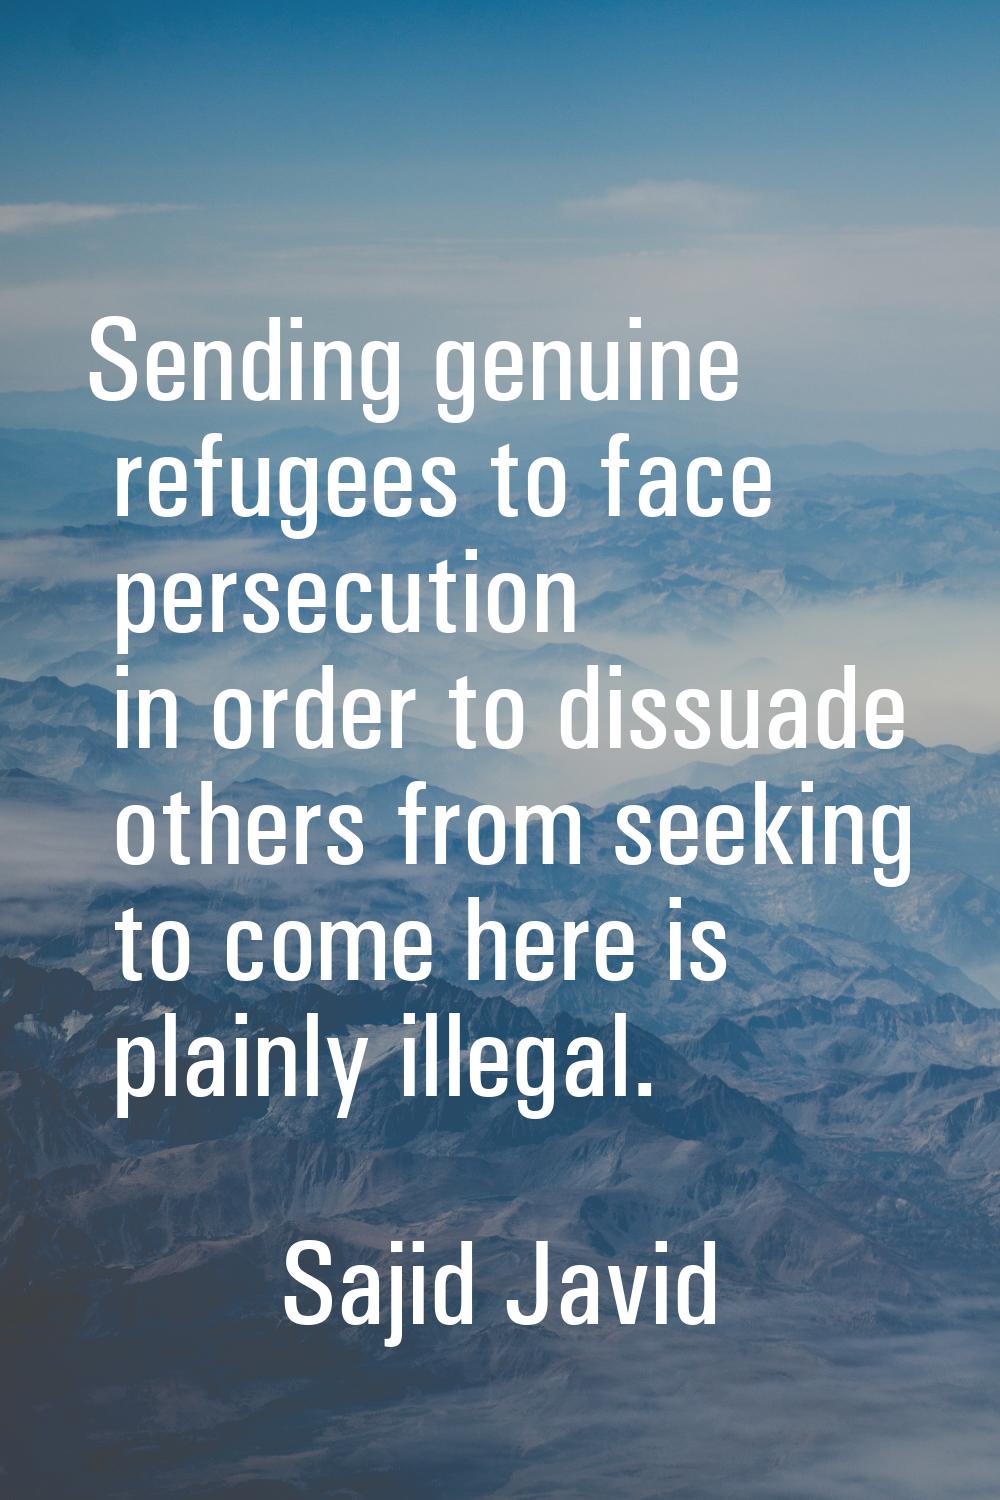 Sending genuine refugees to face persecution in order to dissuade others from seeking to come here 